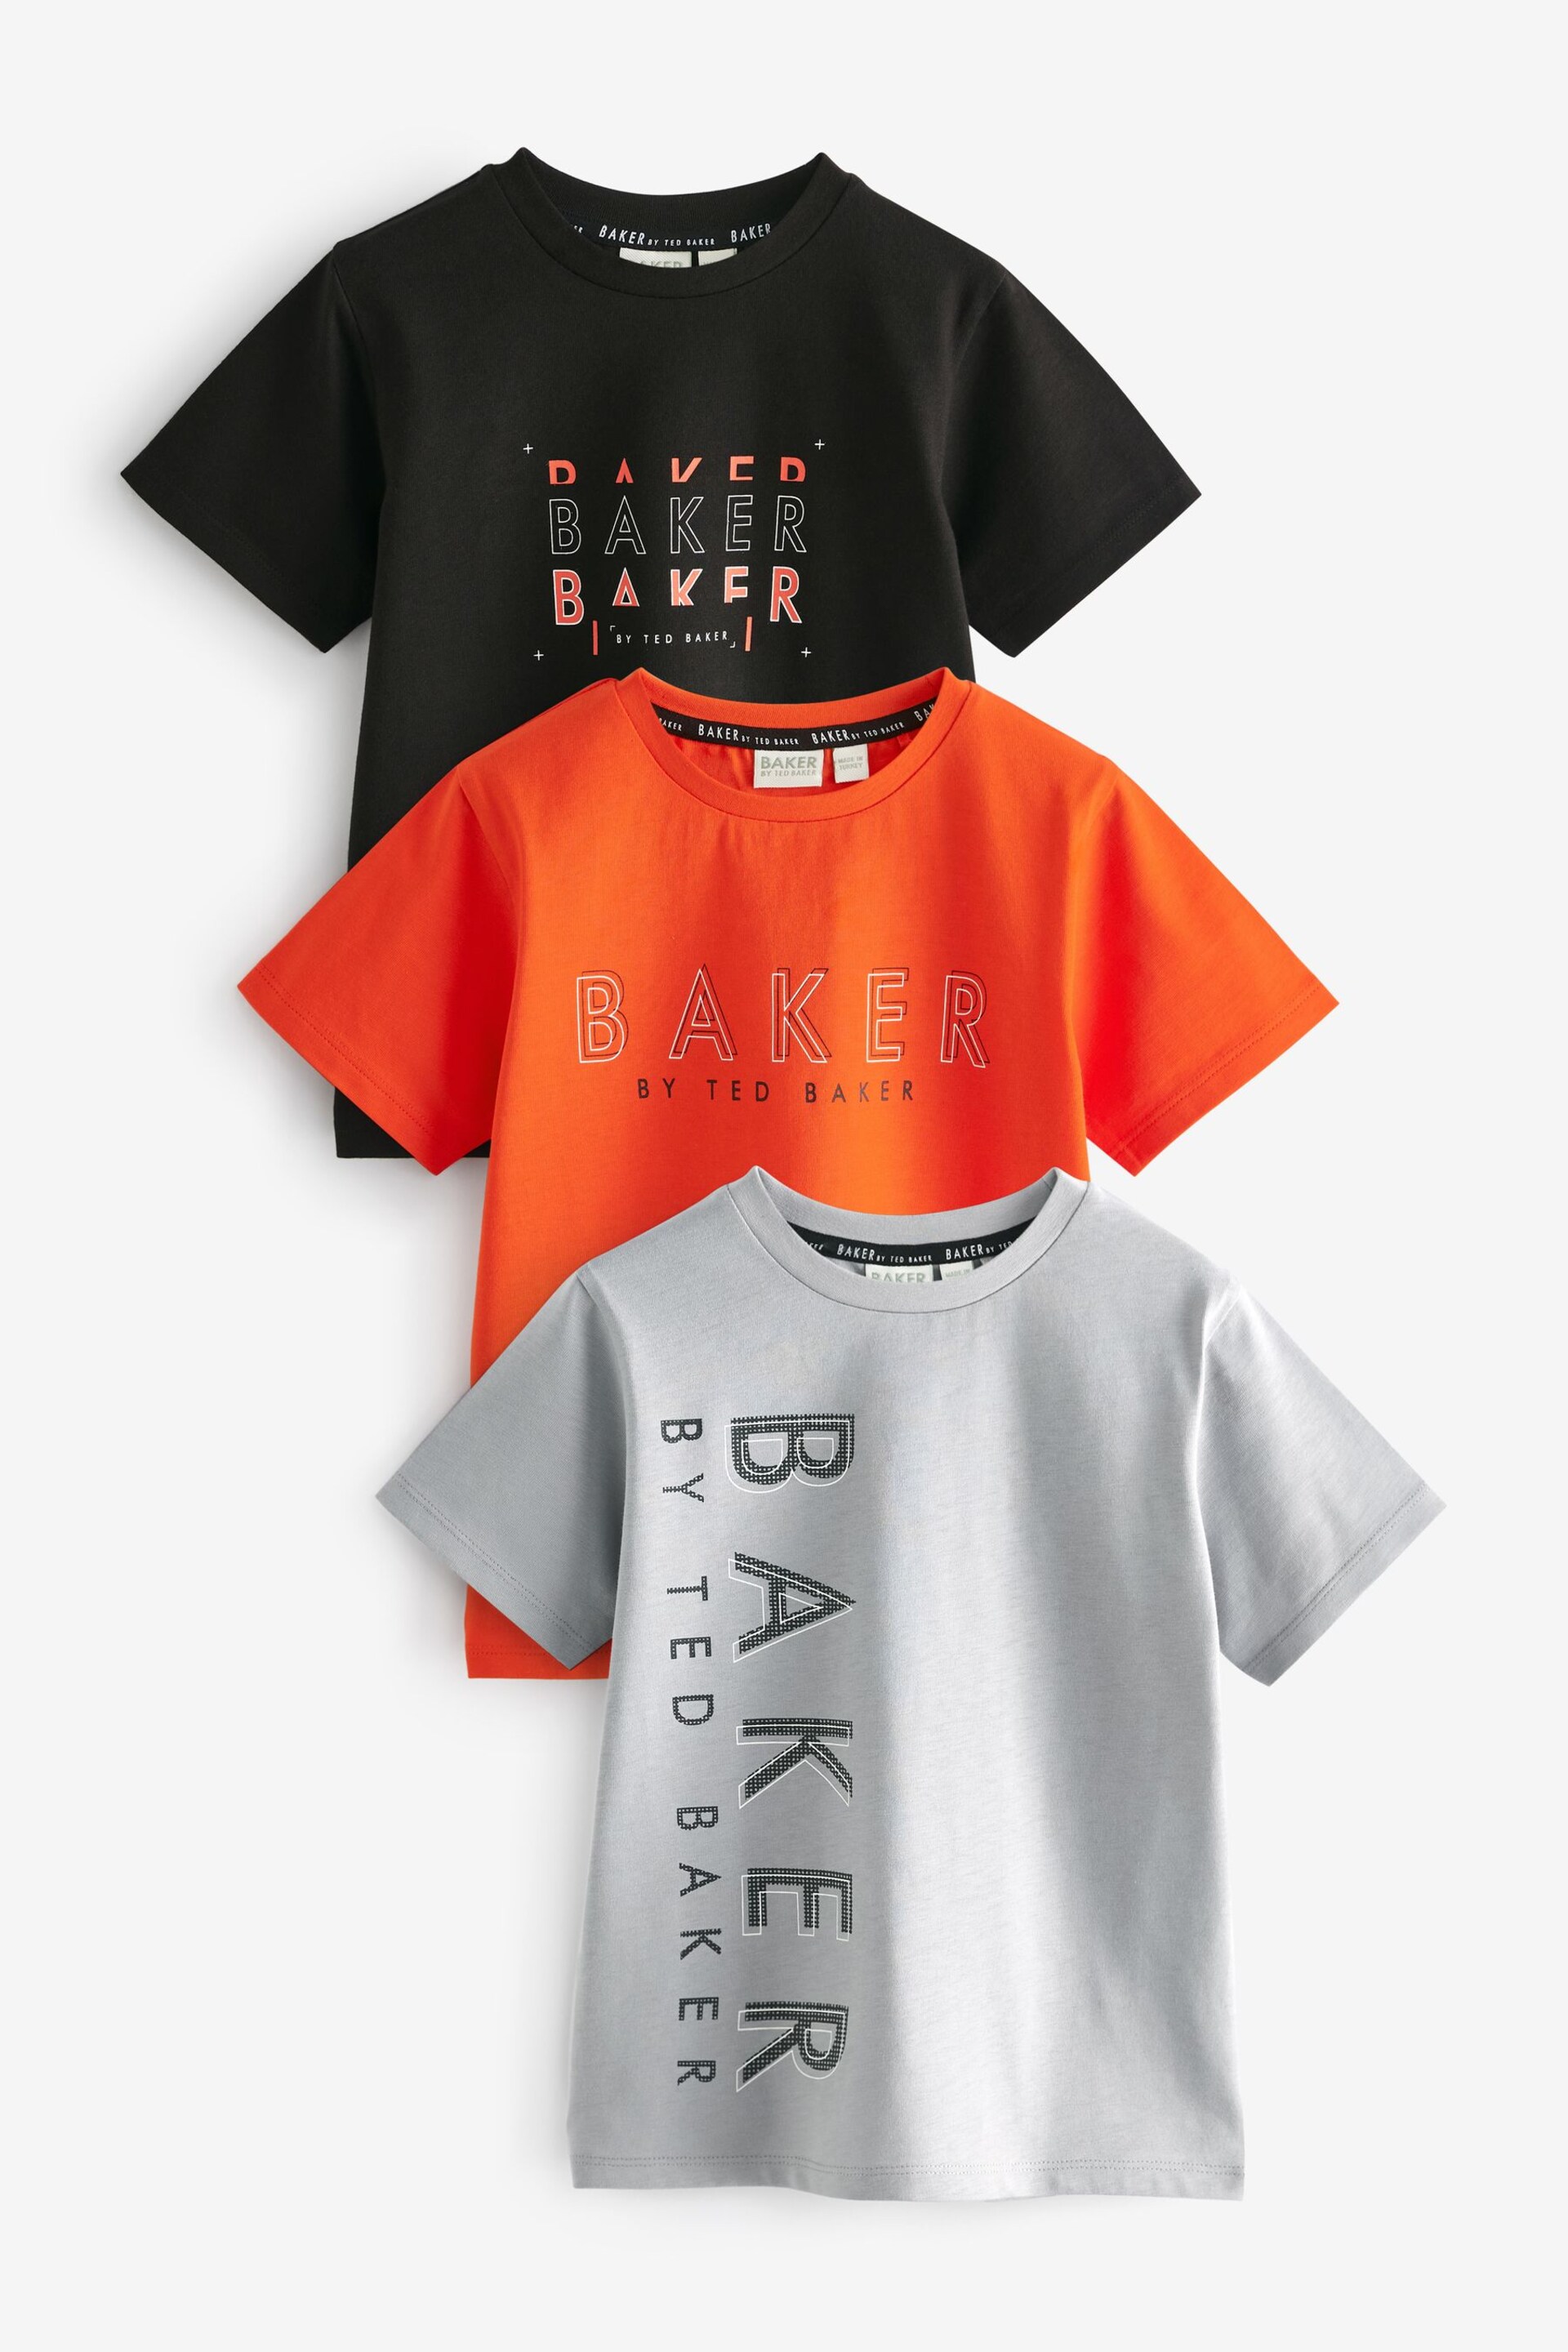 Baker by Ted Baker Graphic T-Shirts 3 Pack - Image 1 of 8